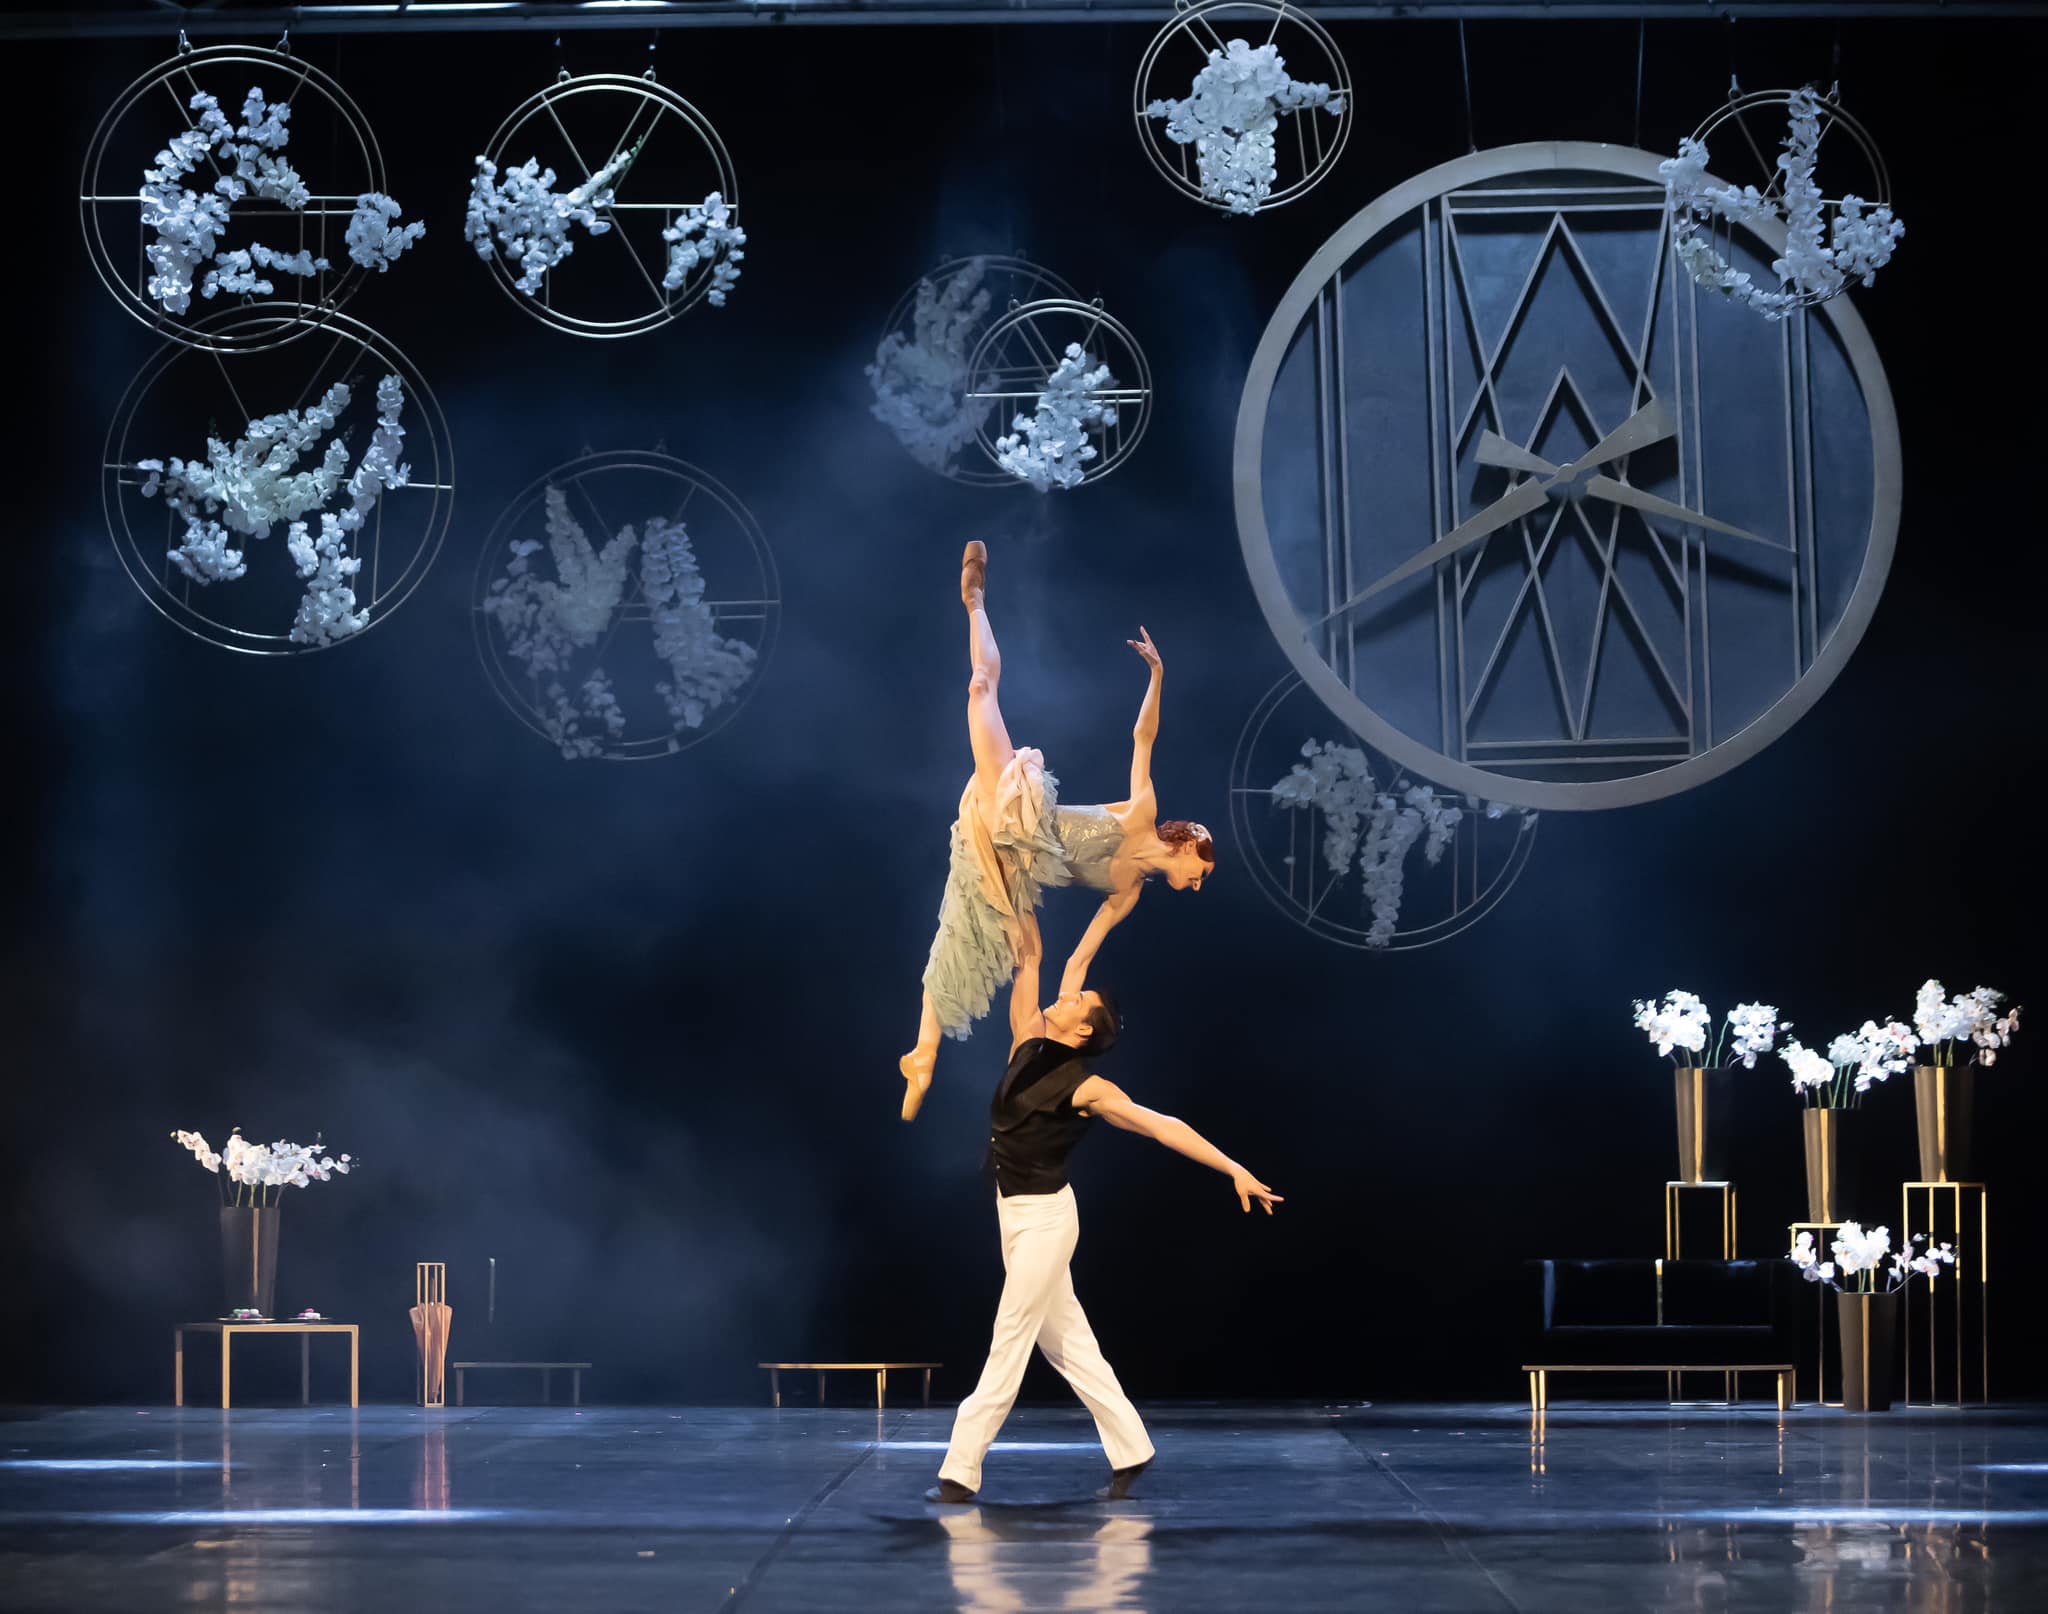 We share photos from the brilliant premiere of the ballet "The Great Gatsby"